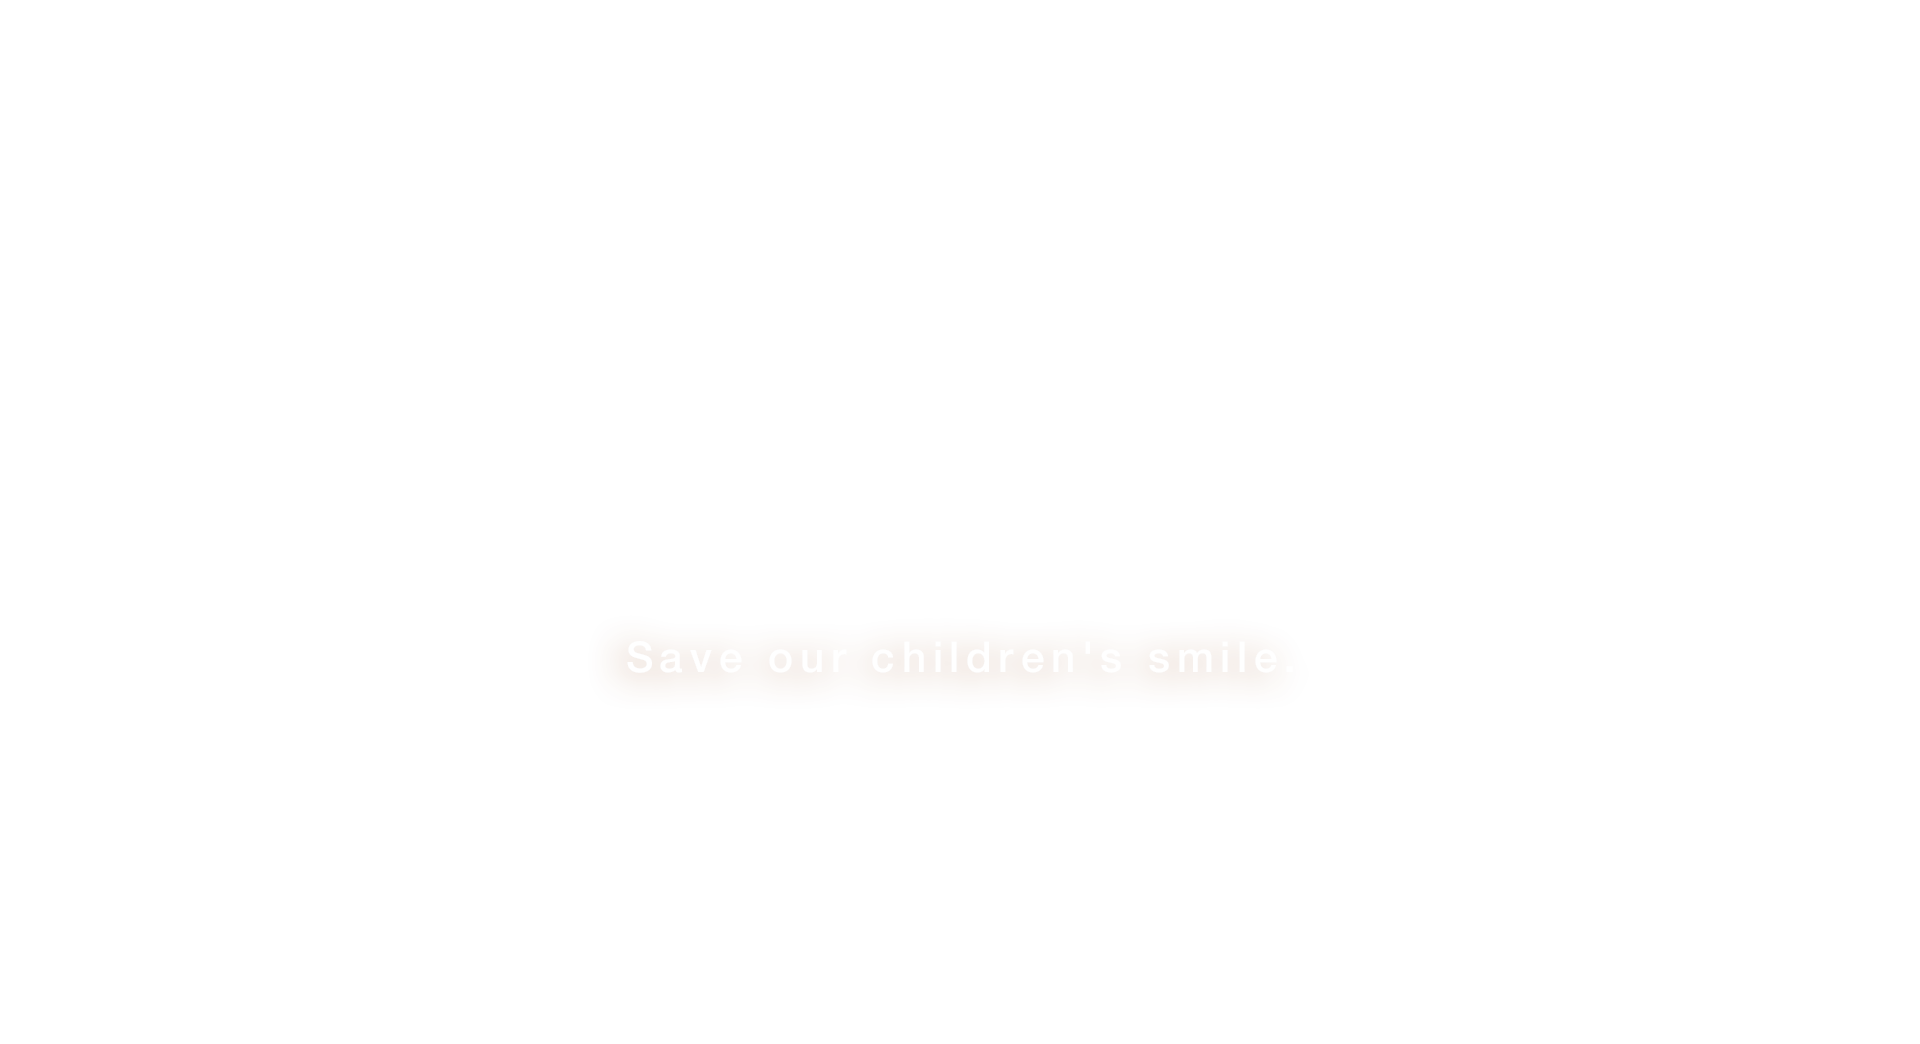 Save our children's smile